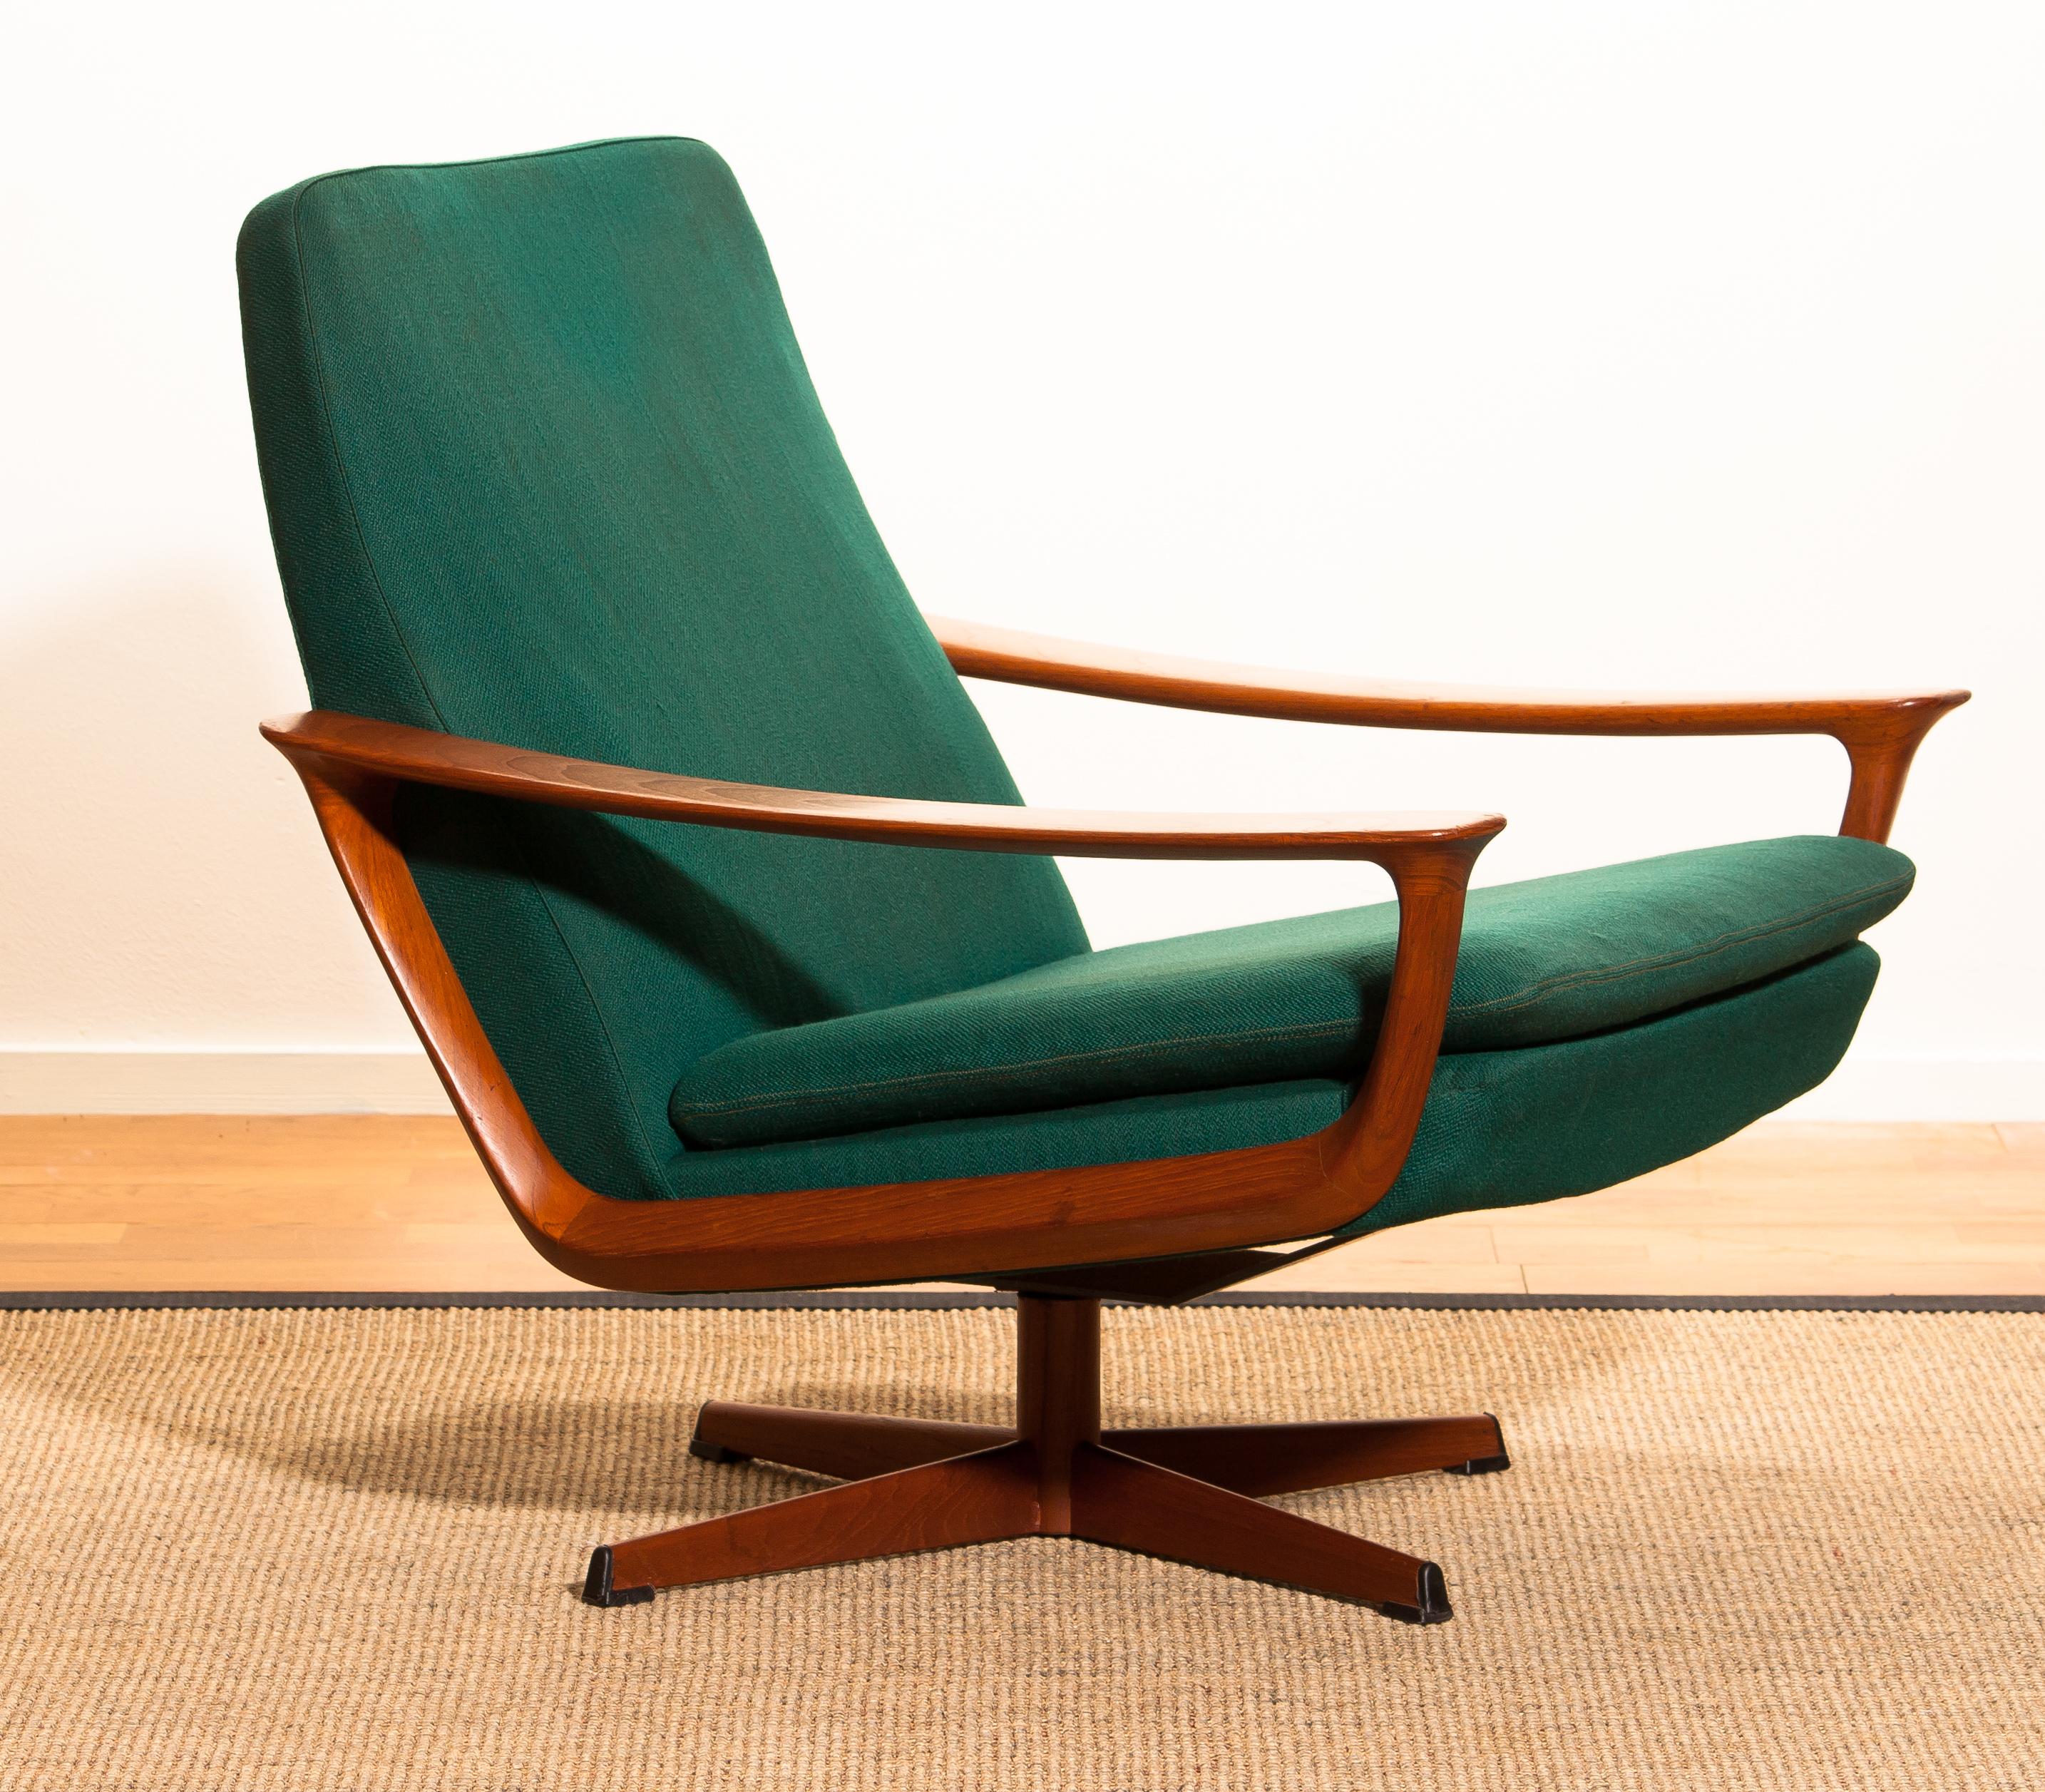 1960s, Teak Set of Two Swivel Chairs by Johannes Andersson for Trensum Denmark 1